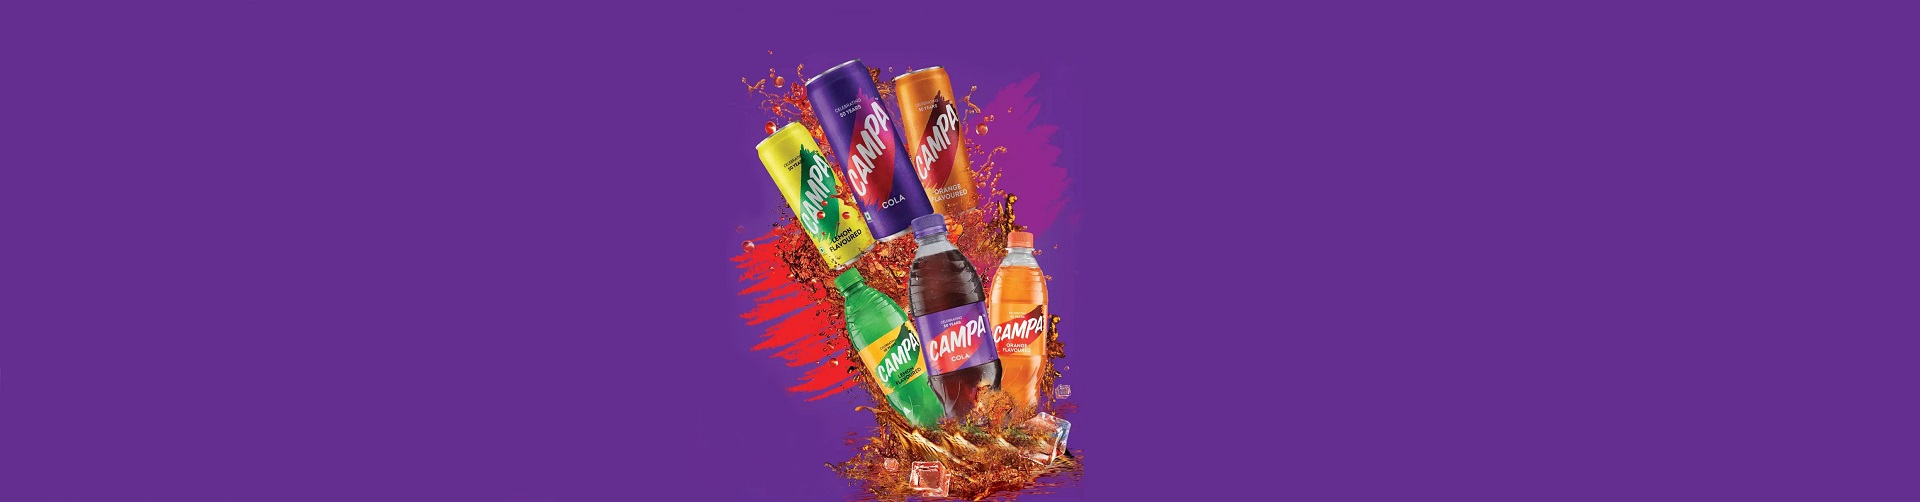 Flavor Frenzy Ahead - Taste the Variety and Explore range of delicious Campa flavors